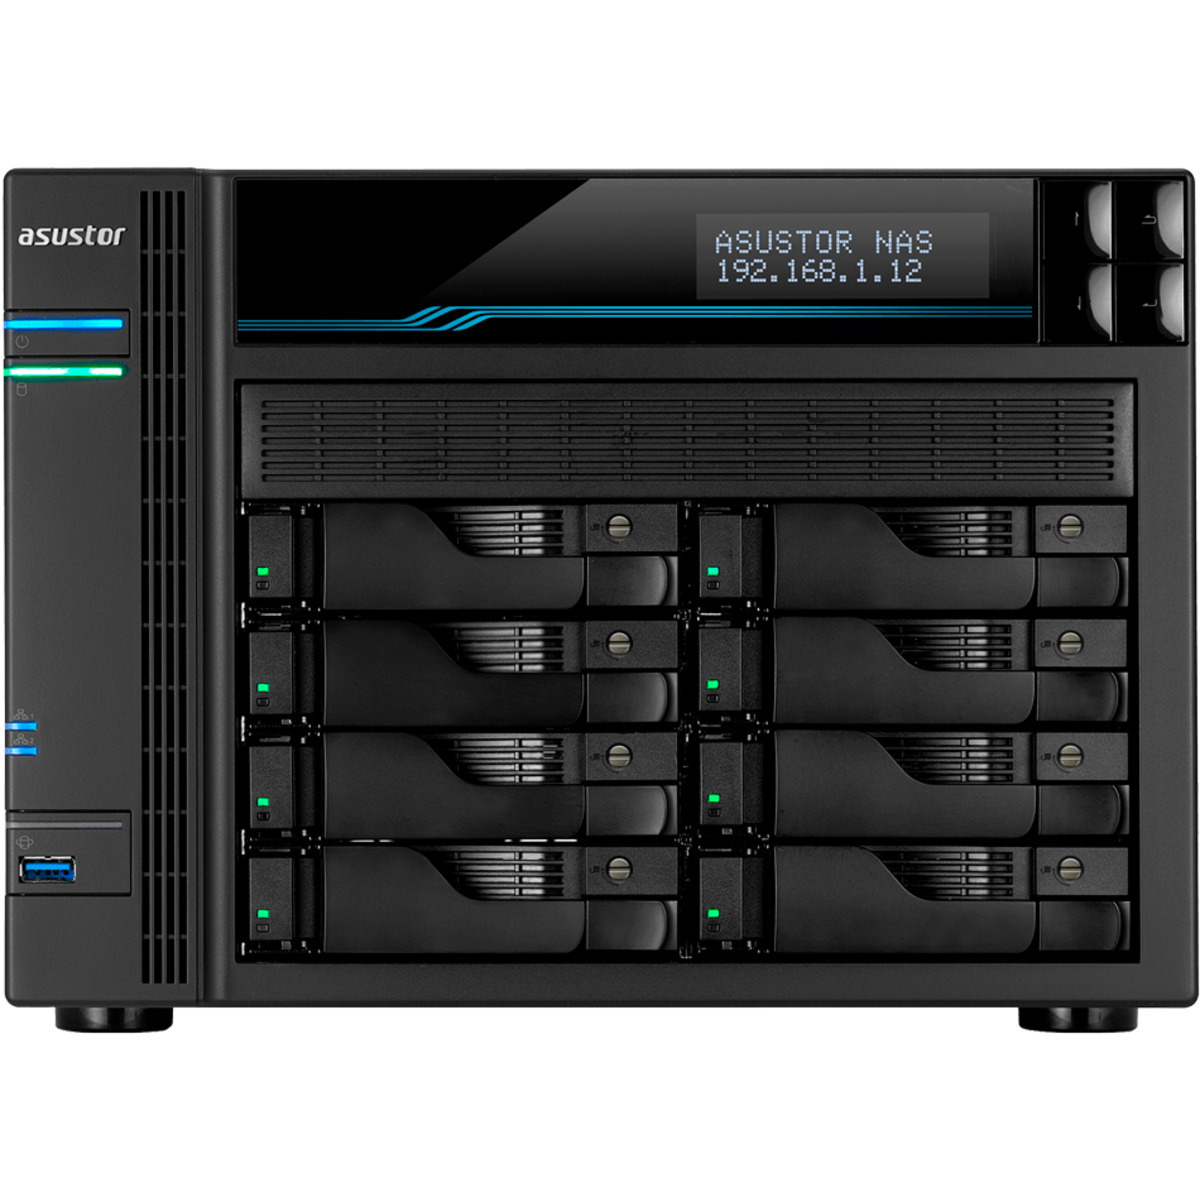 ASUSTOR AS6508T Lockerstor 8 16tb 8-Bay Desktop Multimedia / Power User / Business NAS - Network Attached Storage Device 8x2tb Samsung 870 EVO MZ-77E2T0BAM 2.5 560/530MB/s SATA 6Gb/s SSD CONSUMER Class Drives Installed - Burn-In Tested - ON SALE - FREE RAM UPGRADE AS6508T Lockerstor 8